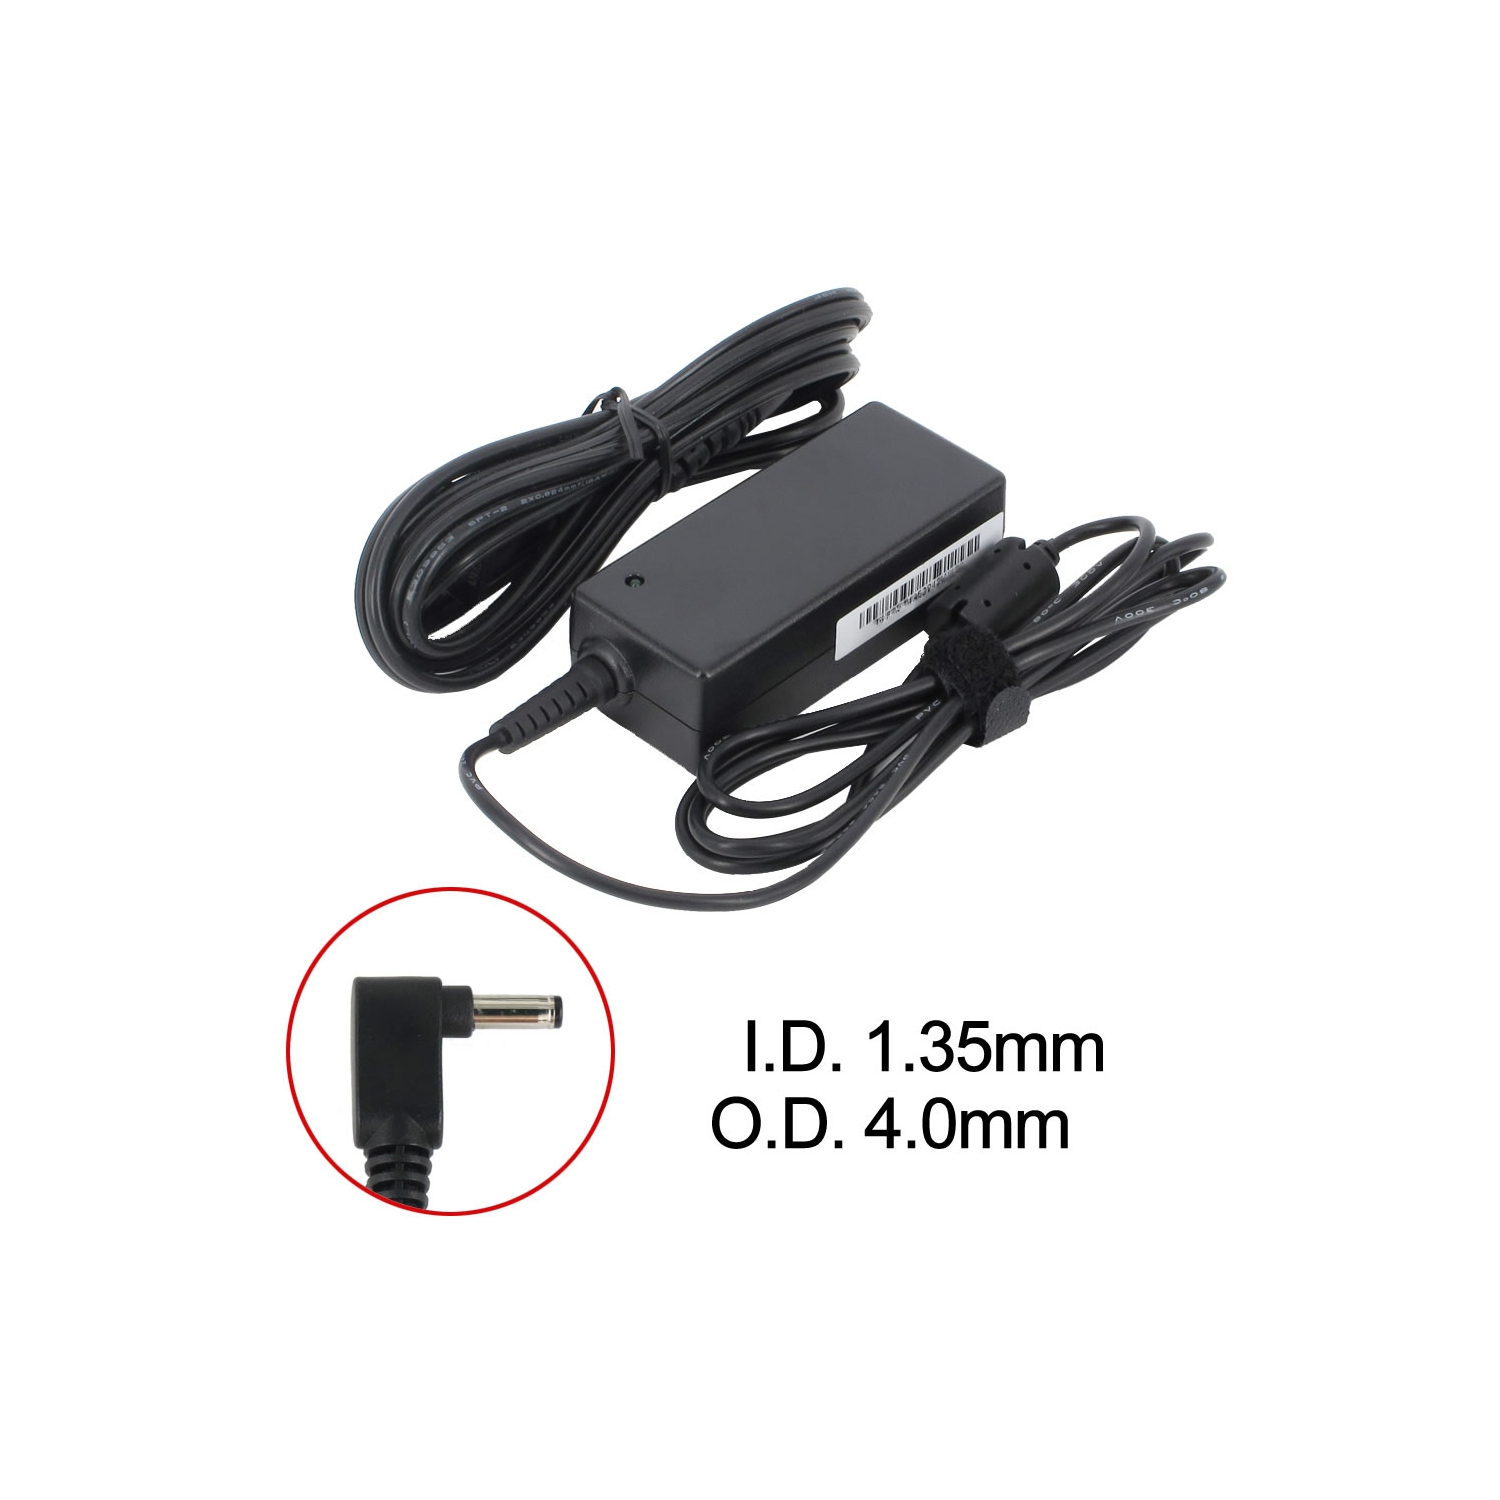 BattDepot: New Laptop AC Adapter for Asus Chromebook C300S, 0A001-00232100, 0A001-00340200, EXA1206UH